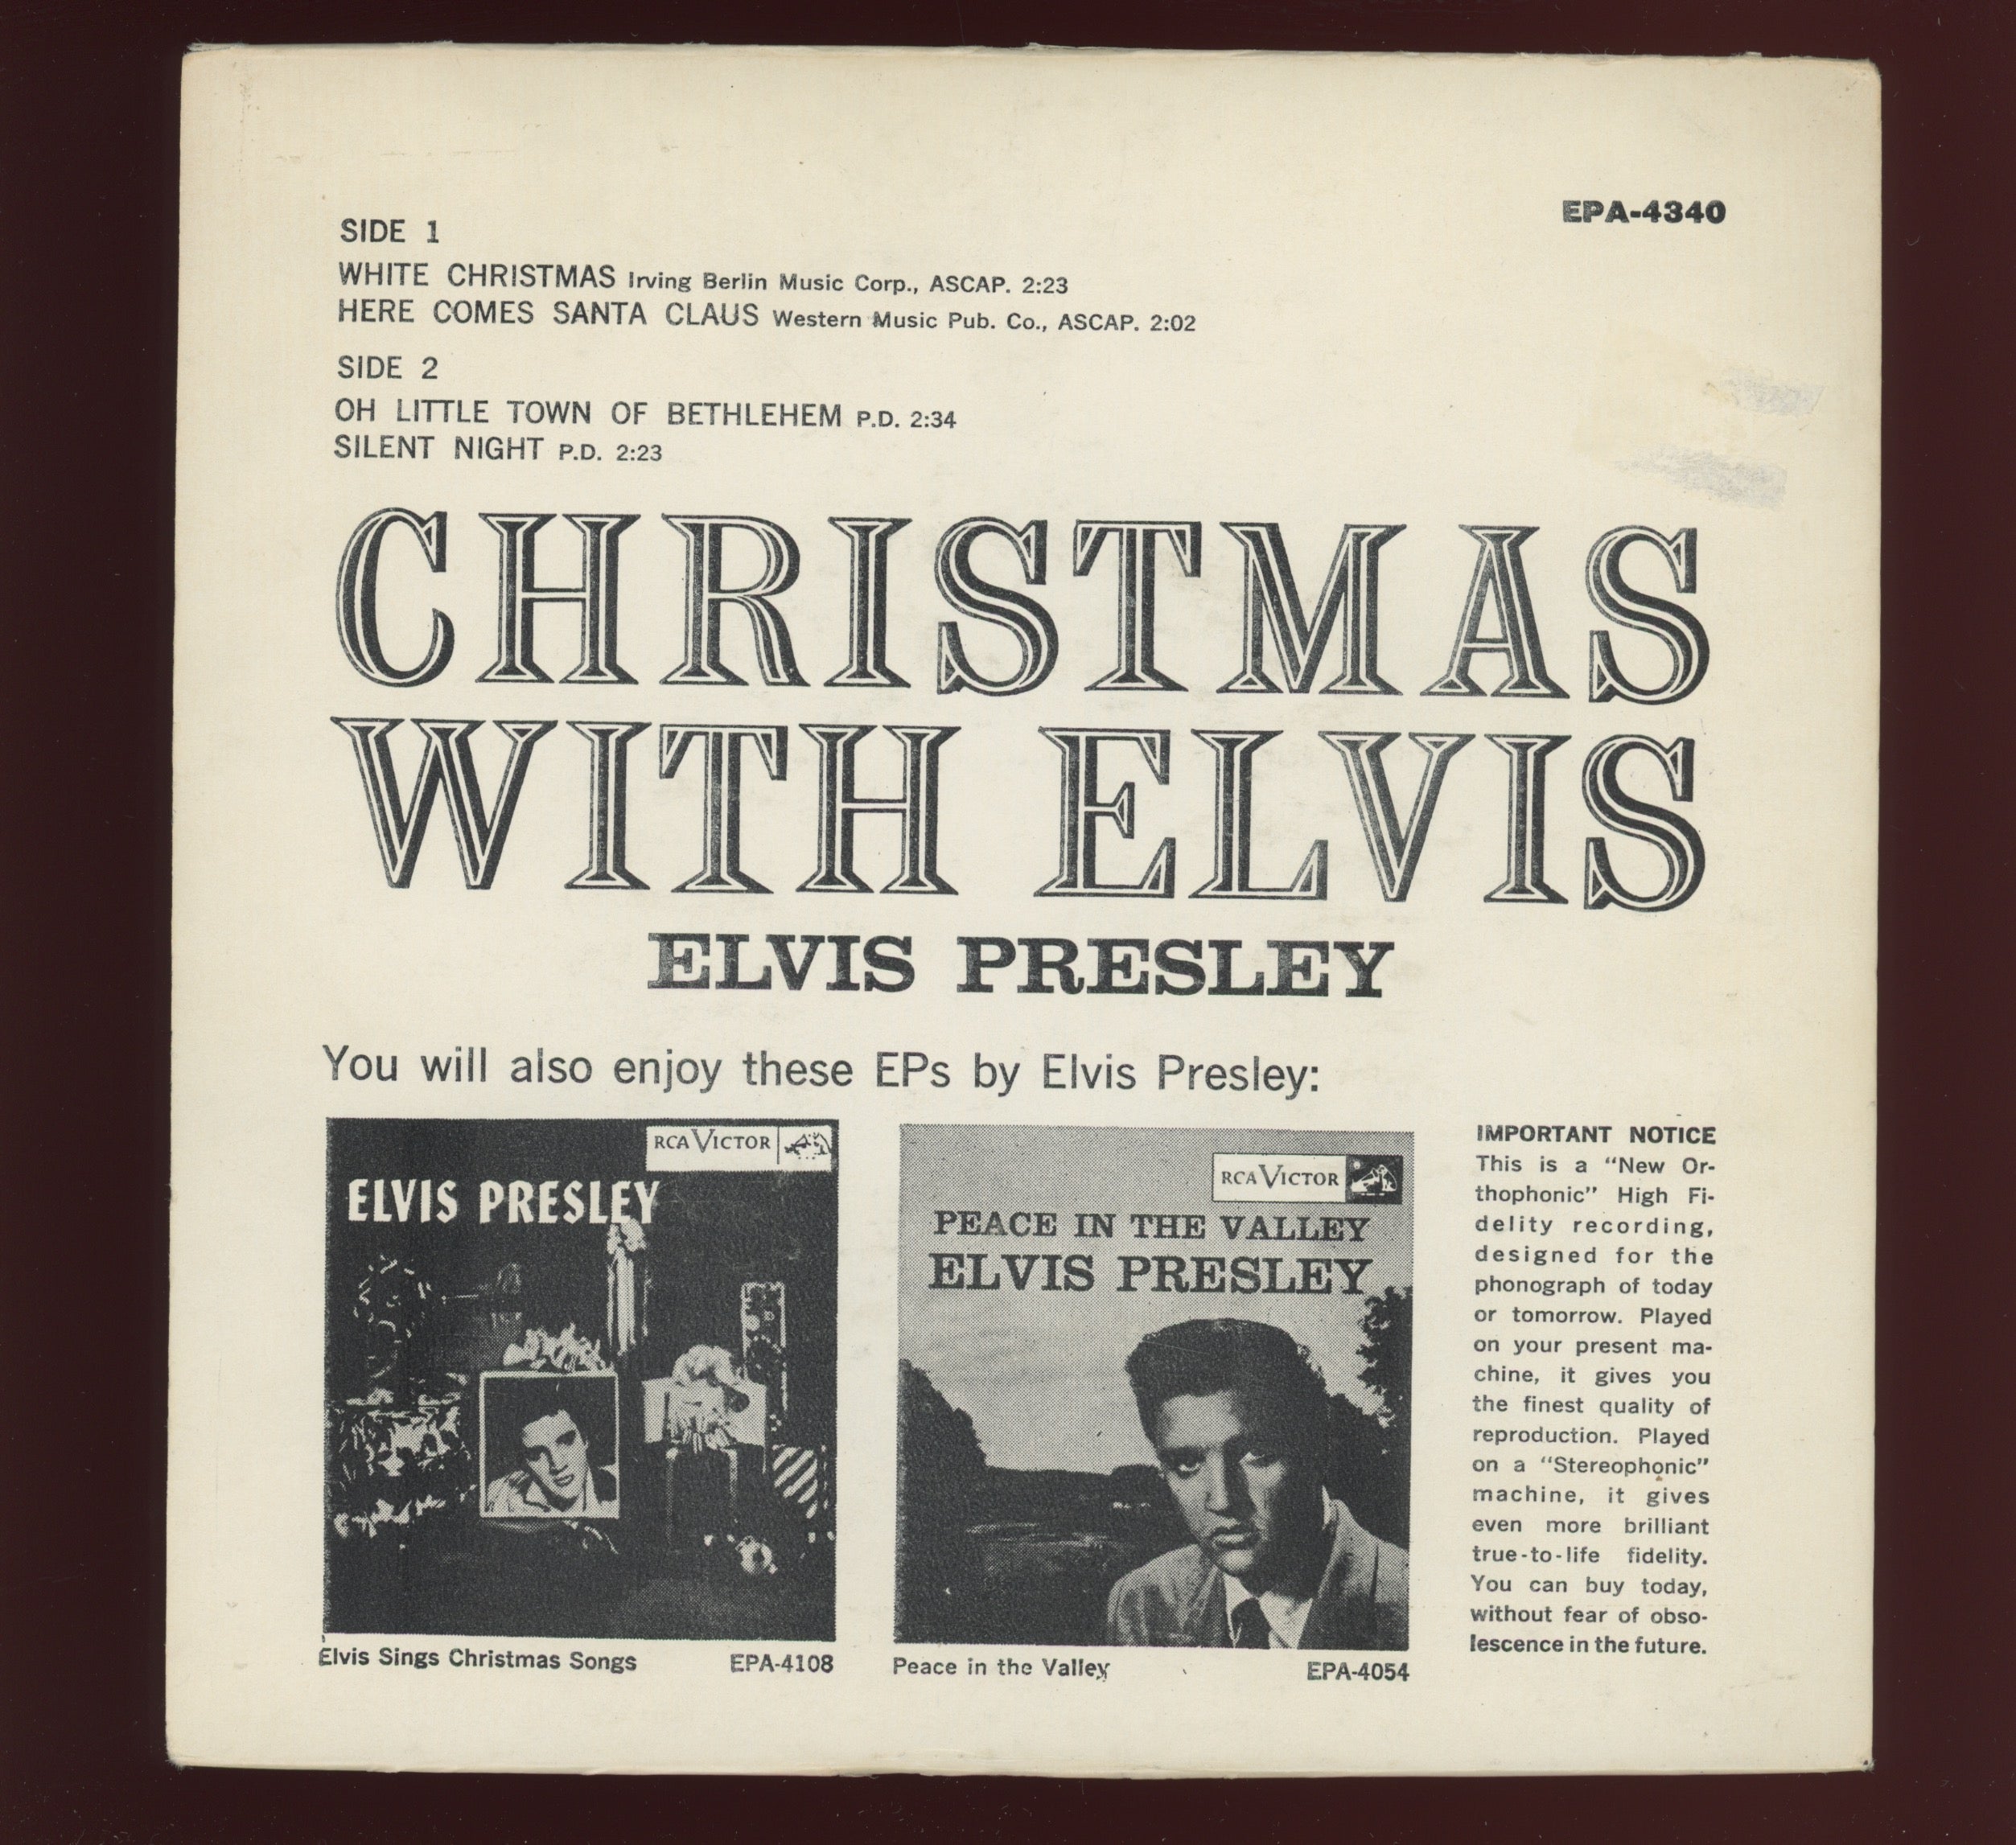 Elvis Presley - Christmas With Elvis on RCA EPA 4340 Rare Orange Label EP 45 With Cover